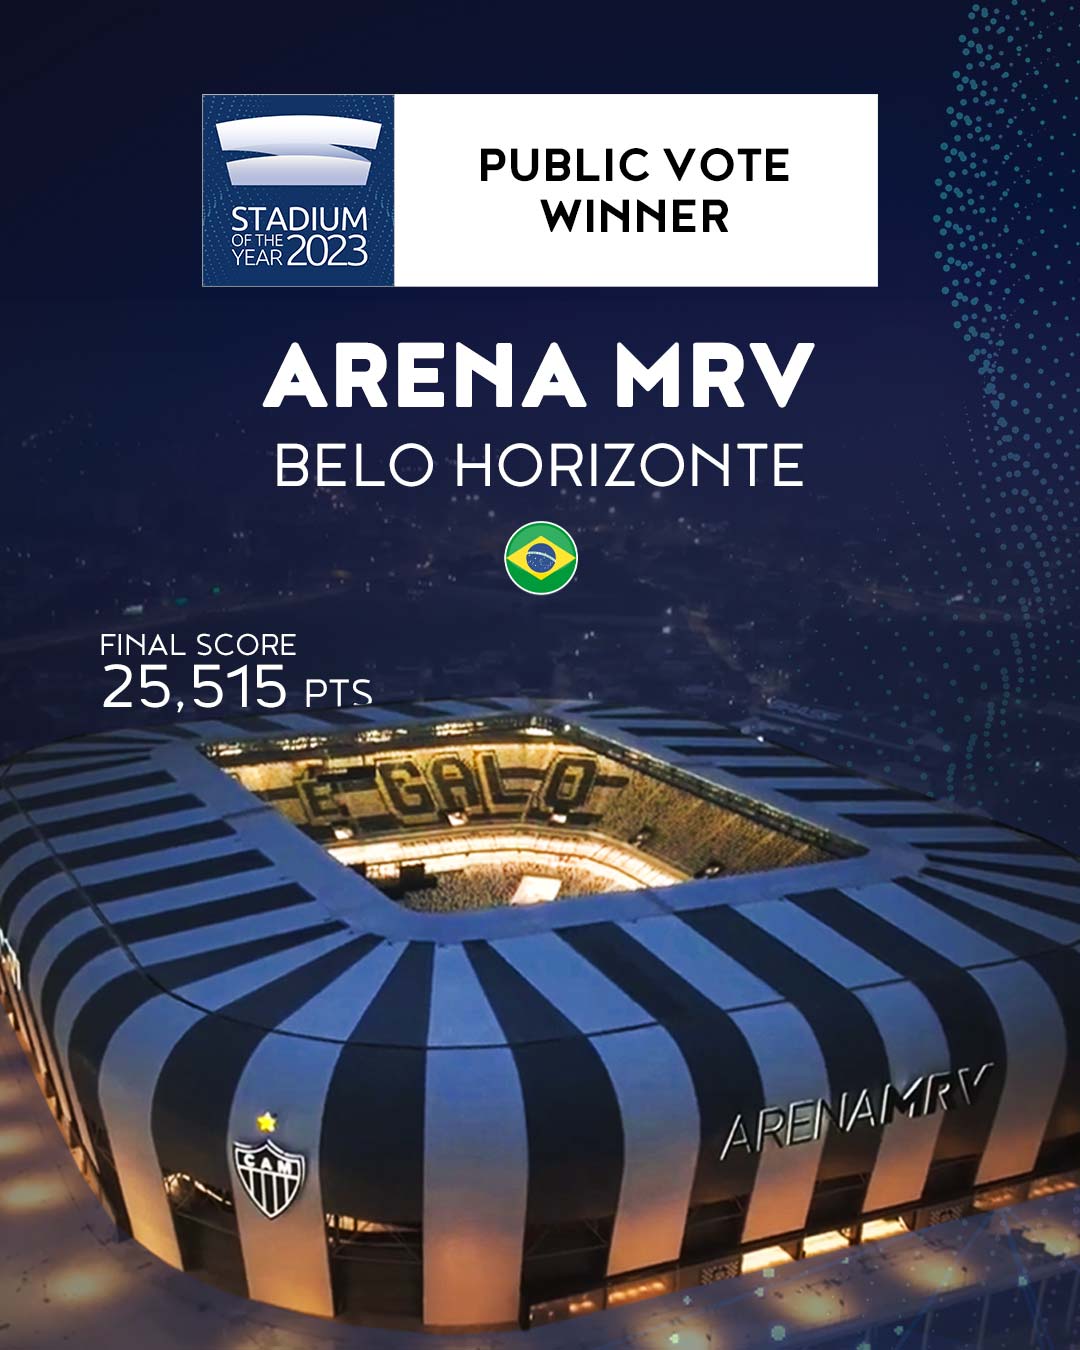 Arena MRV is Stadium of the Year 2023